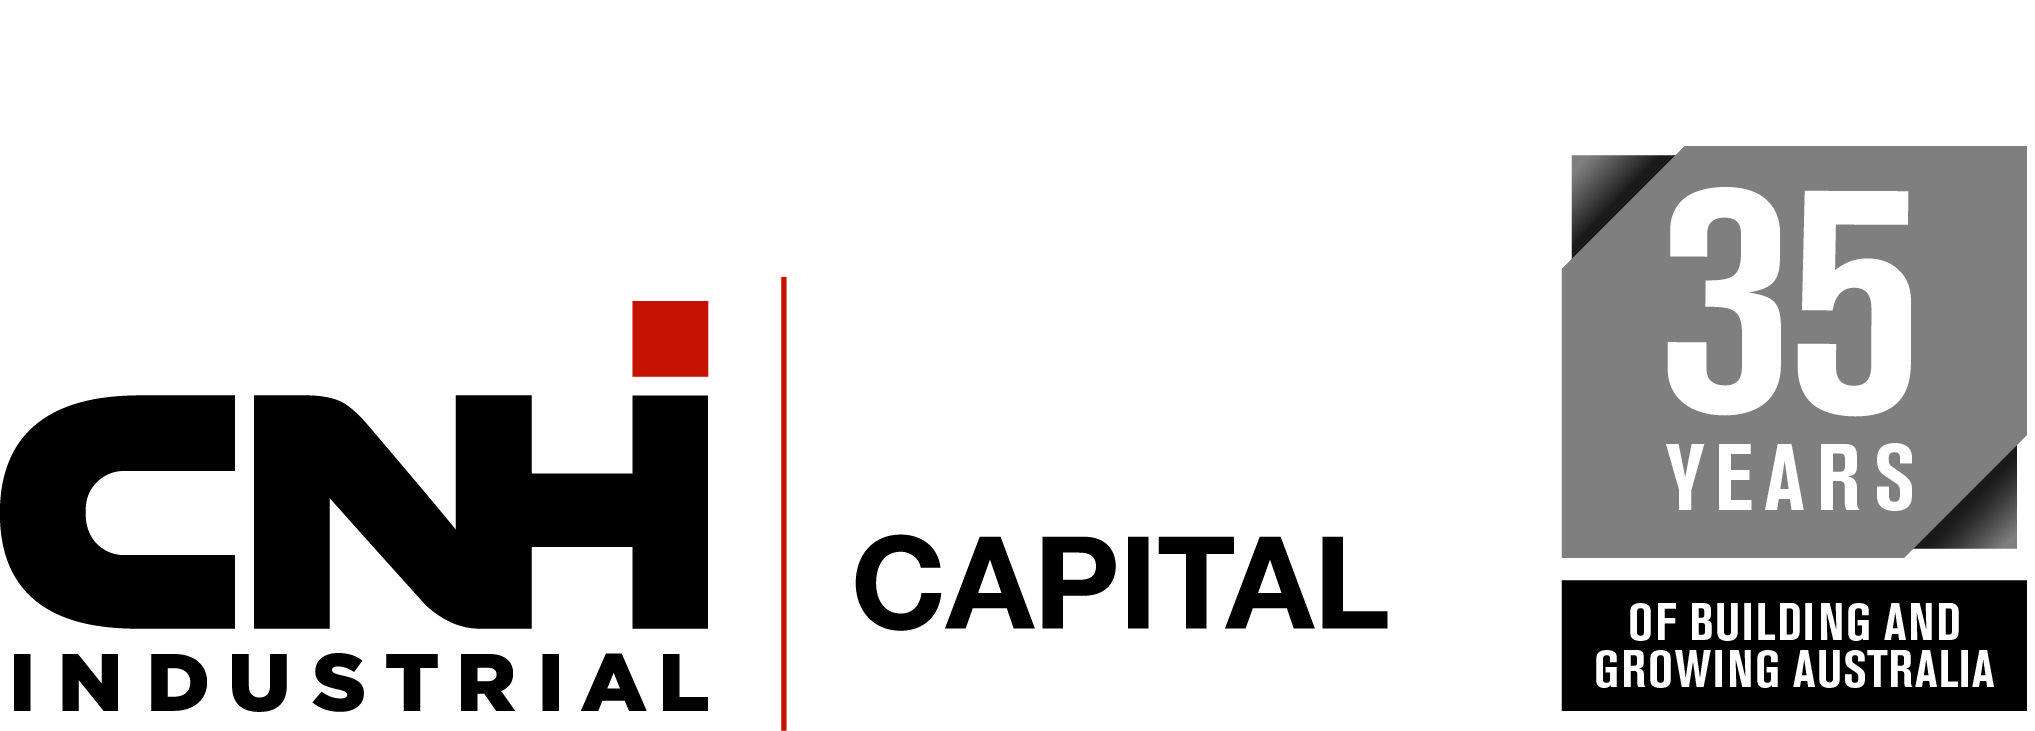 CNH Logo - Our History | CNHIndustrial Capital